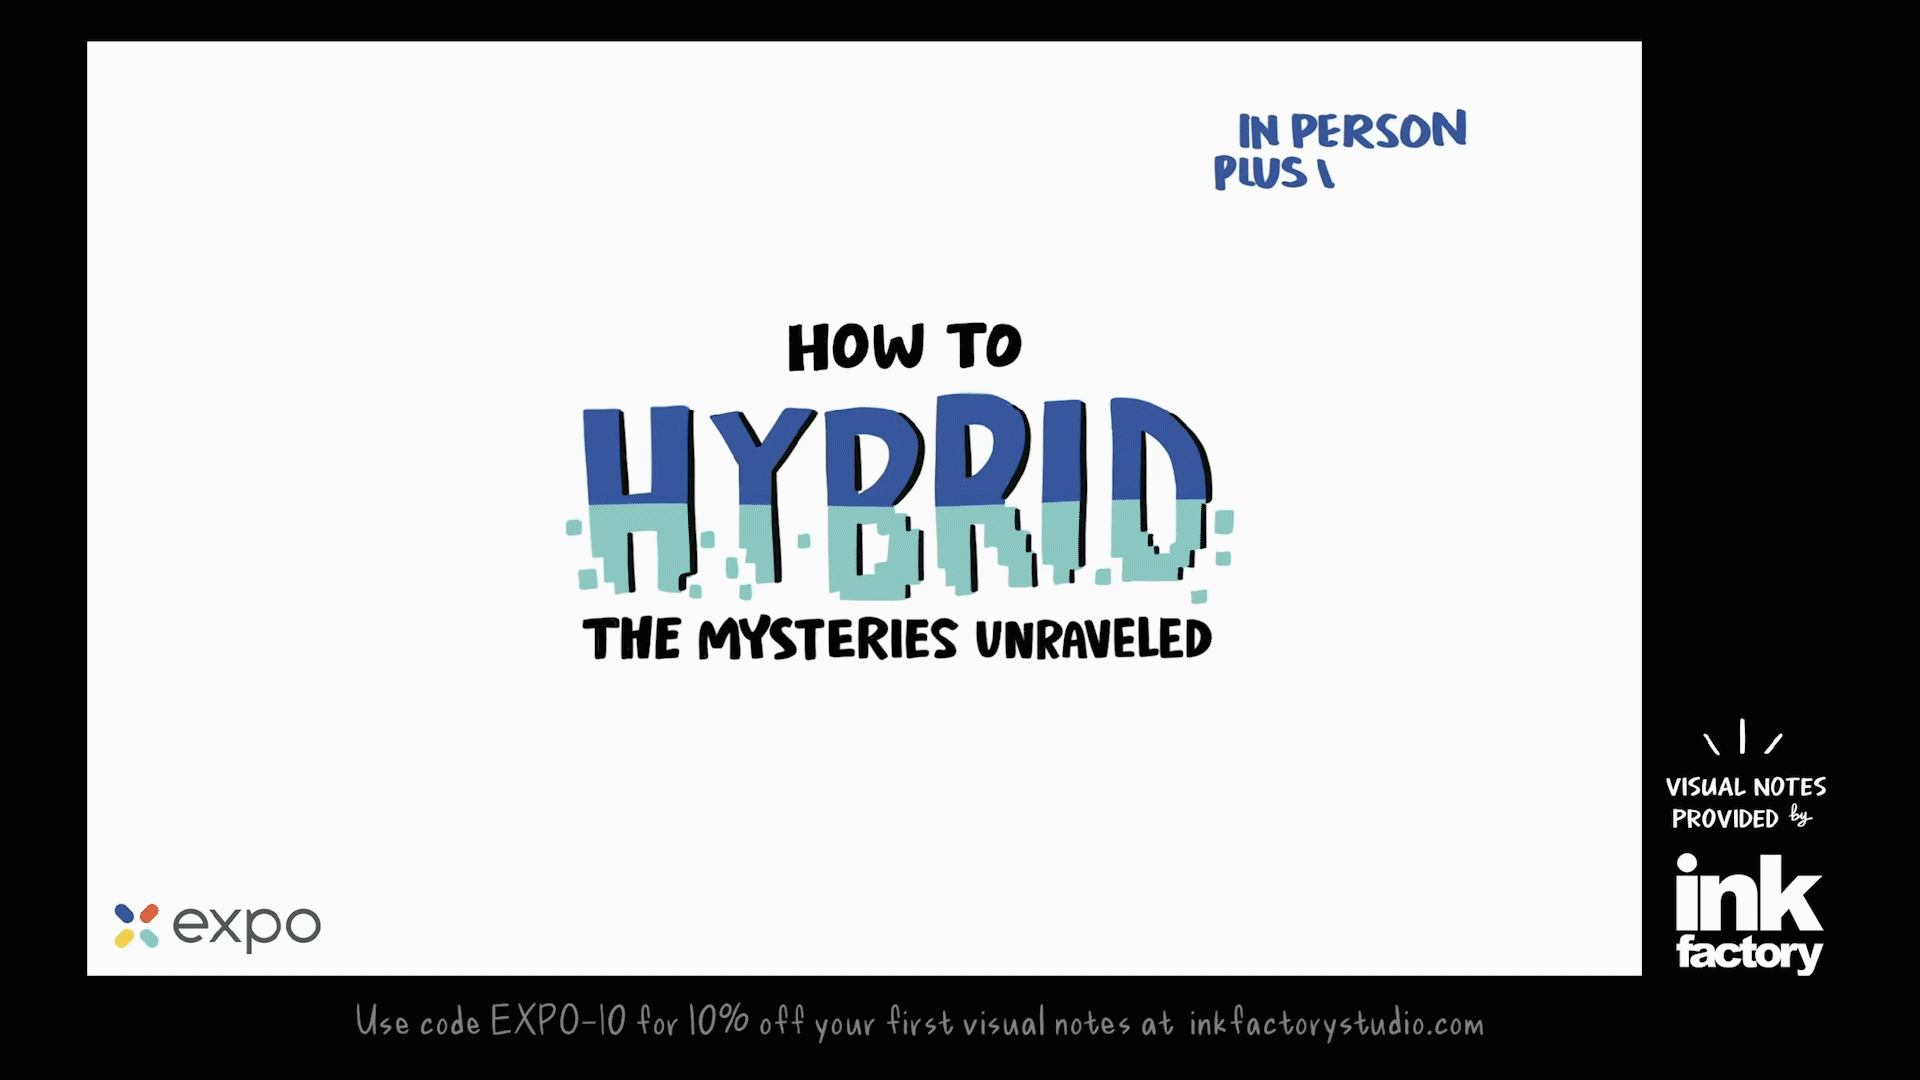 GIF of Expo, Inc hybrid webinar ad "How to Hybrid: The mysteries unraveled"